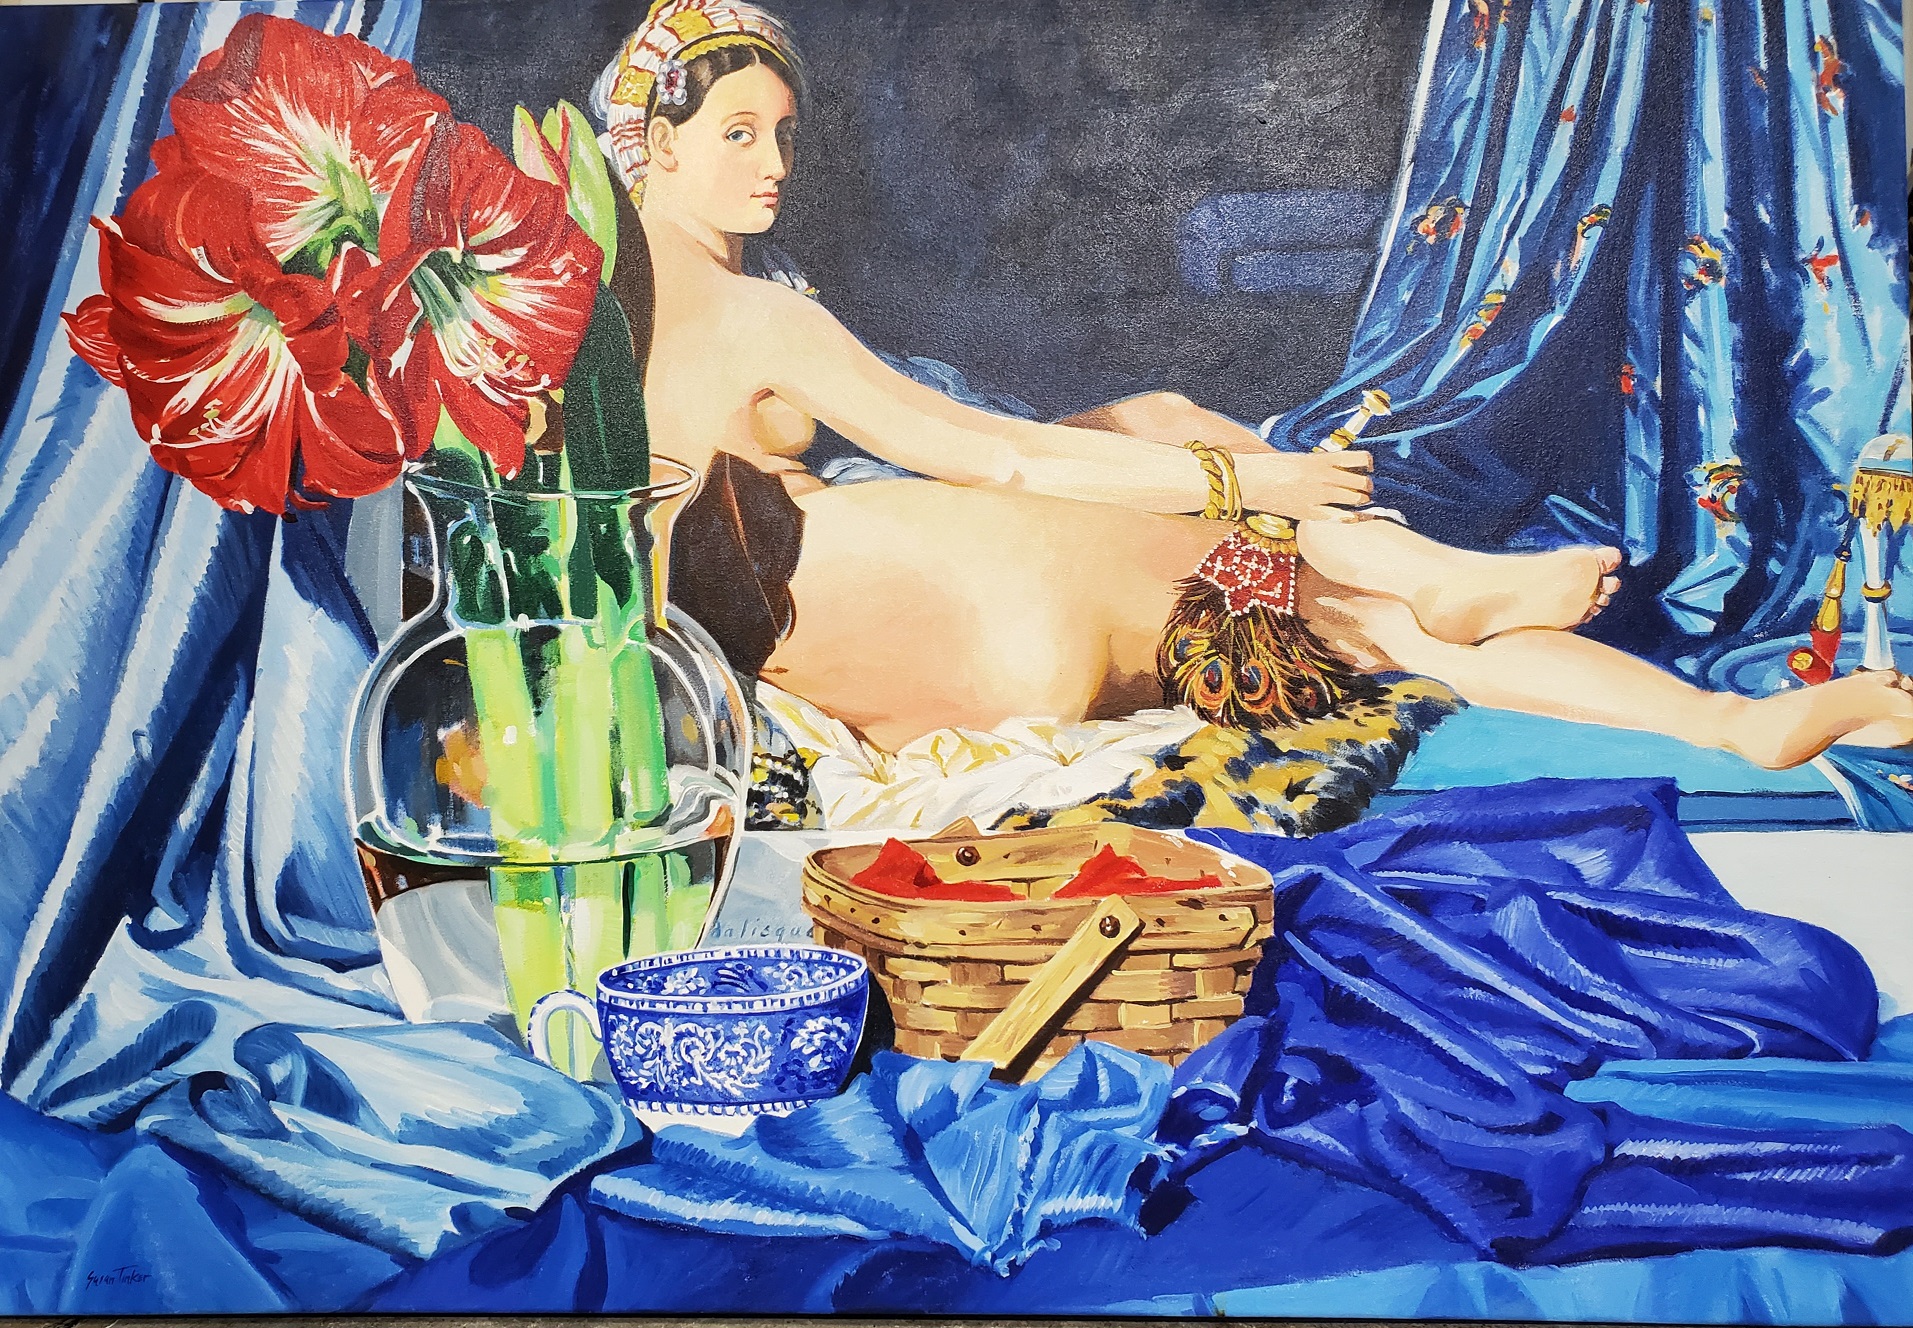 Susan Tinker, “Amaryllis and Odalisque”, oil on canvas